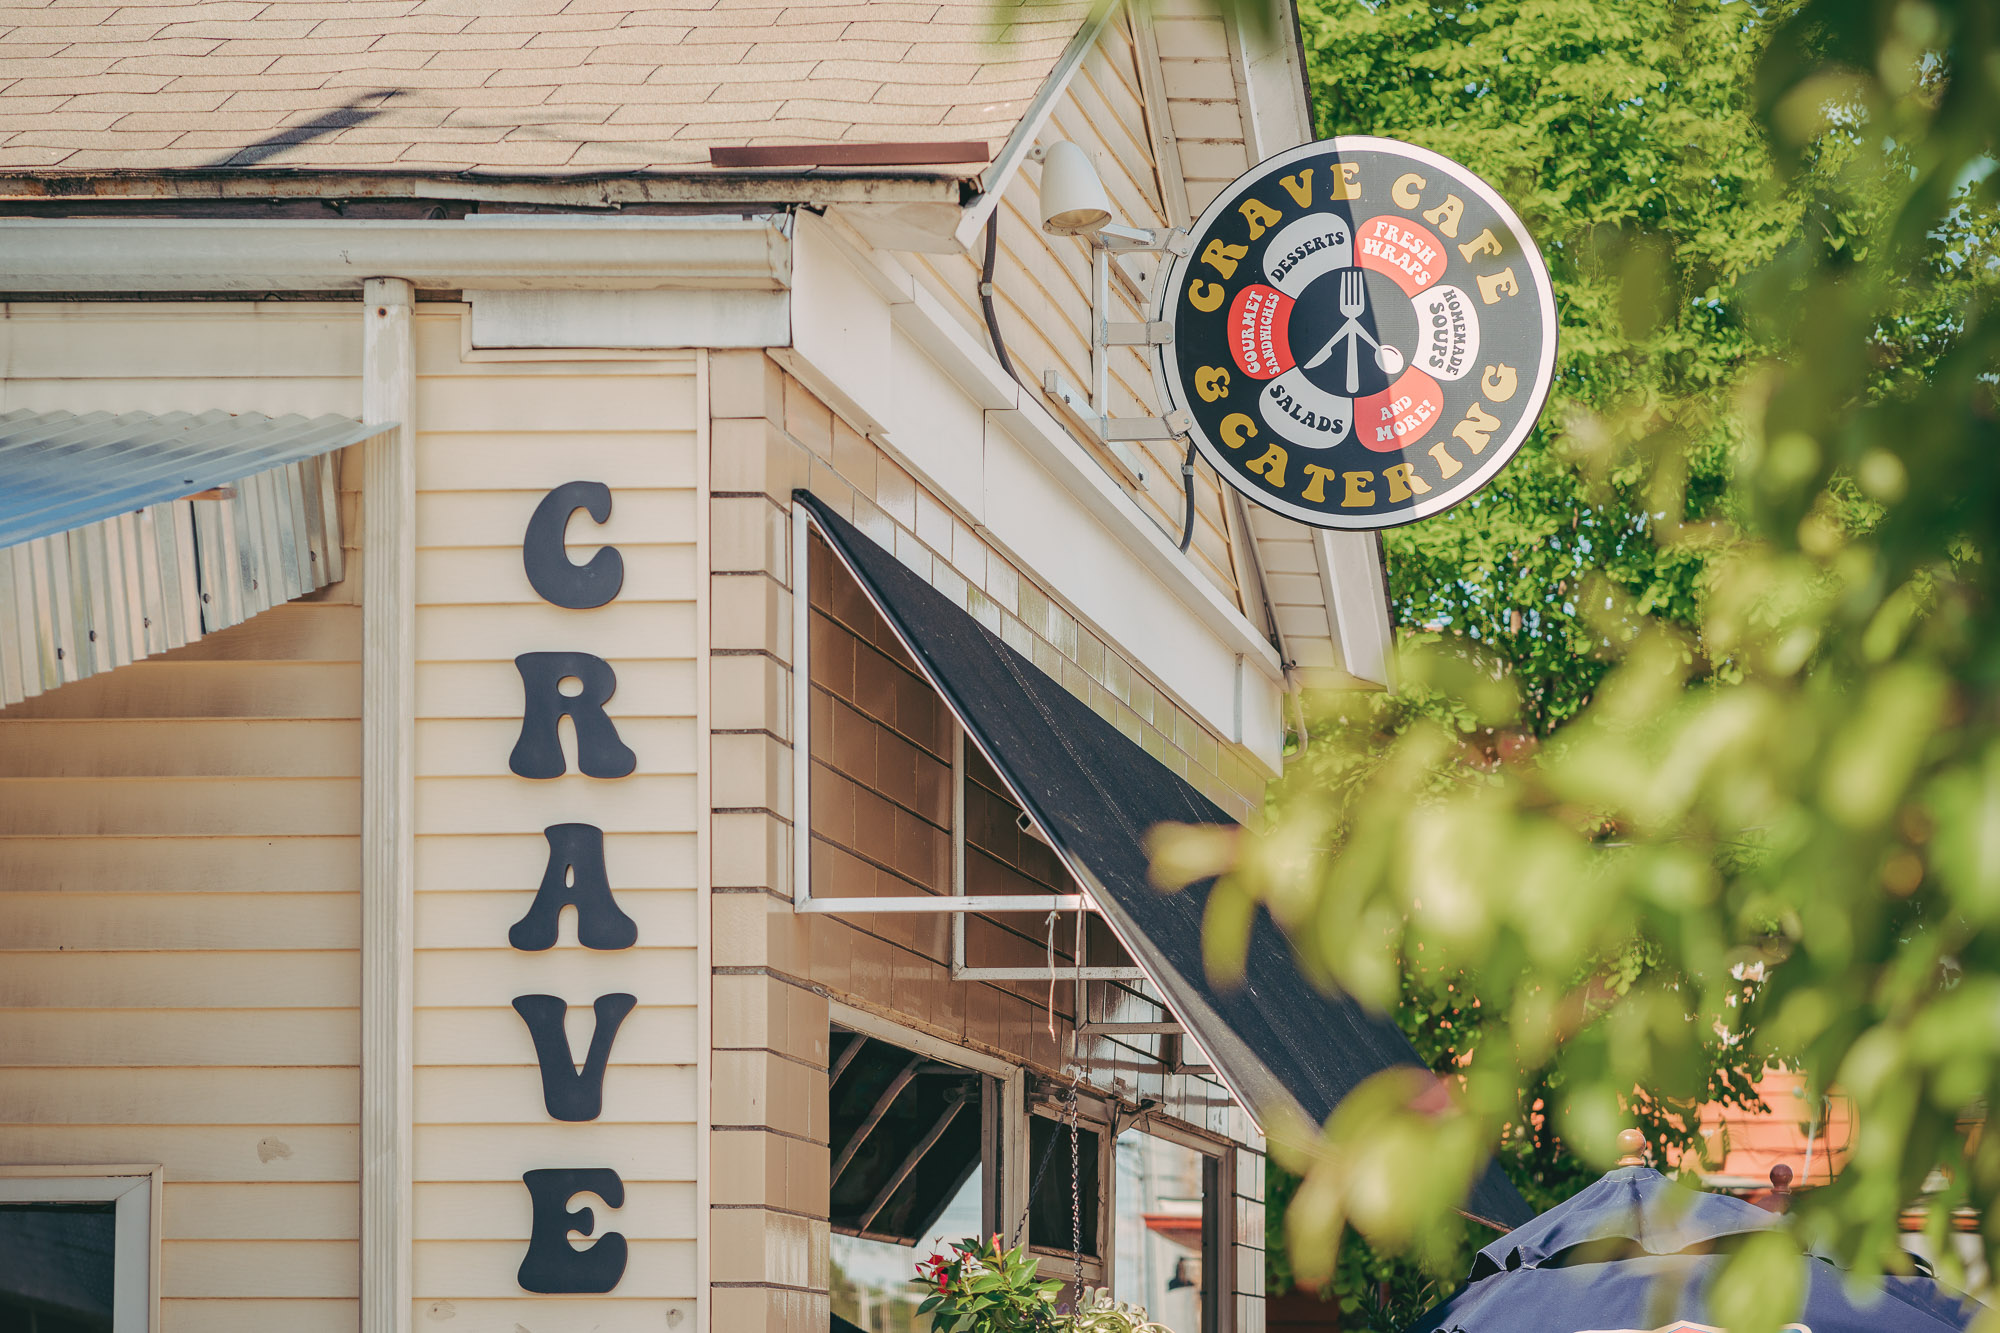 Crave Cafe & Catering